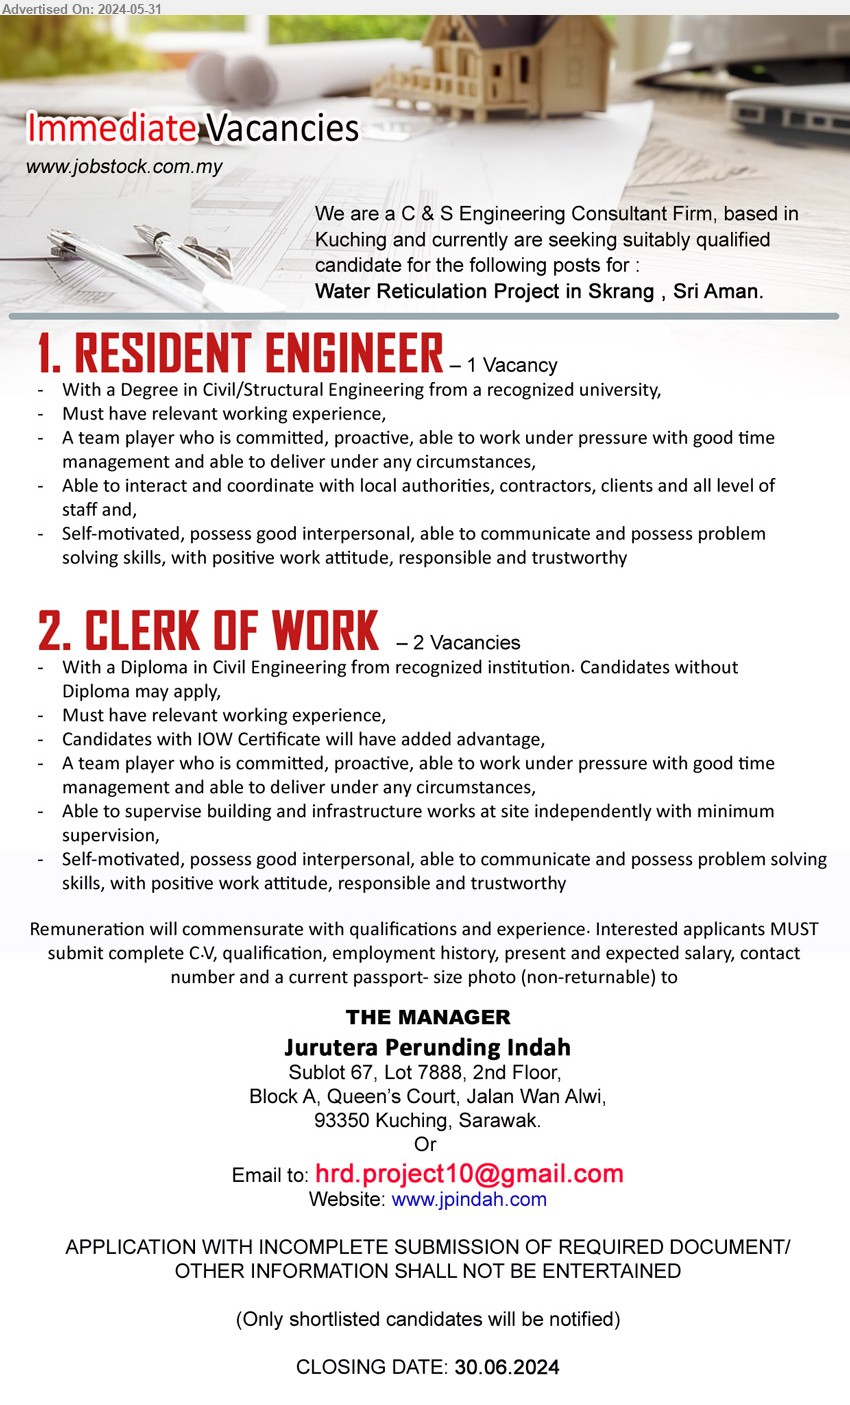 JURUTERA PERUNDING INDAH - 1. RESIDENT ENGINEER (Skrang , Sri Aman), With a Degree in Civil/Structural Engineering from a recognized university, Must have relevant working experience,...
2. CLERK OF WORK (Skrang , Sri Aman), With a Diploma in Civil Engineering from recognized institution. Candidates without Diploma may apply, Candidates with IOW Certificate will have added advantage,...
Email resume to...